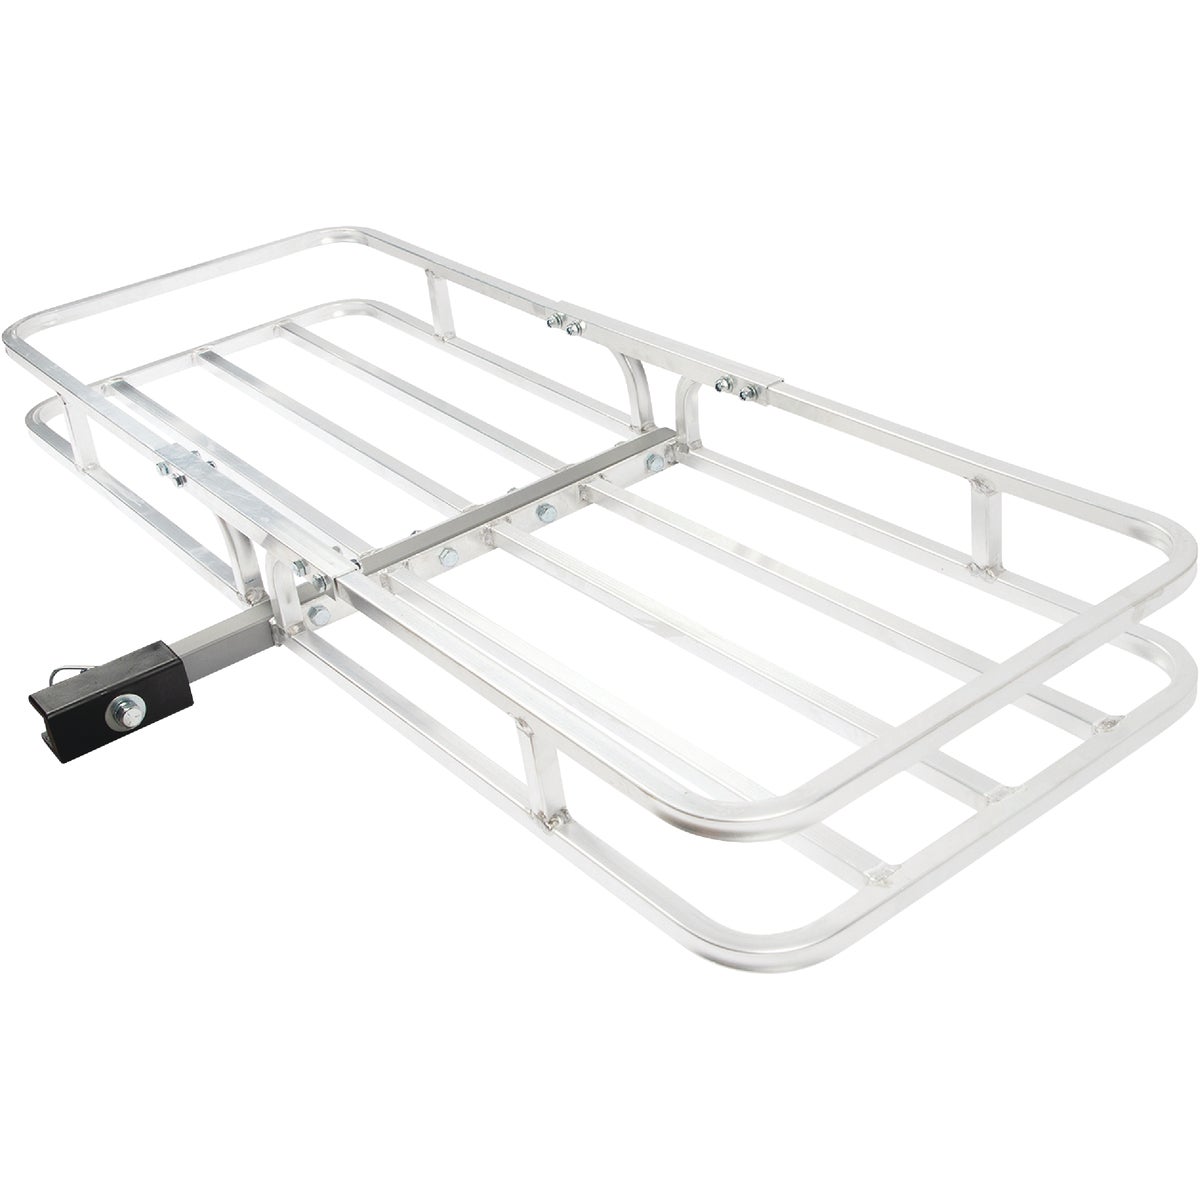 Item 570431, All aluminum cargo carrier is lightweight and manufactured with a welded 